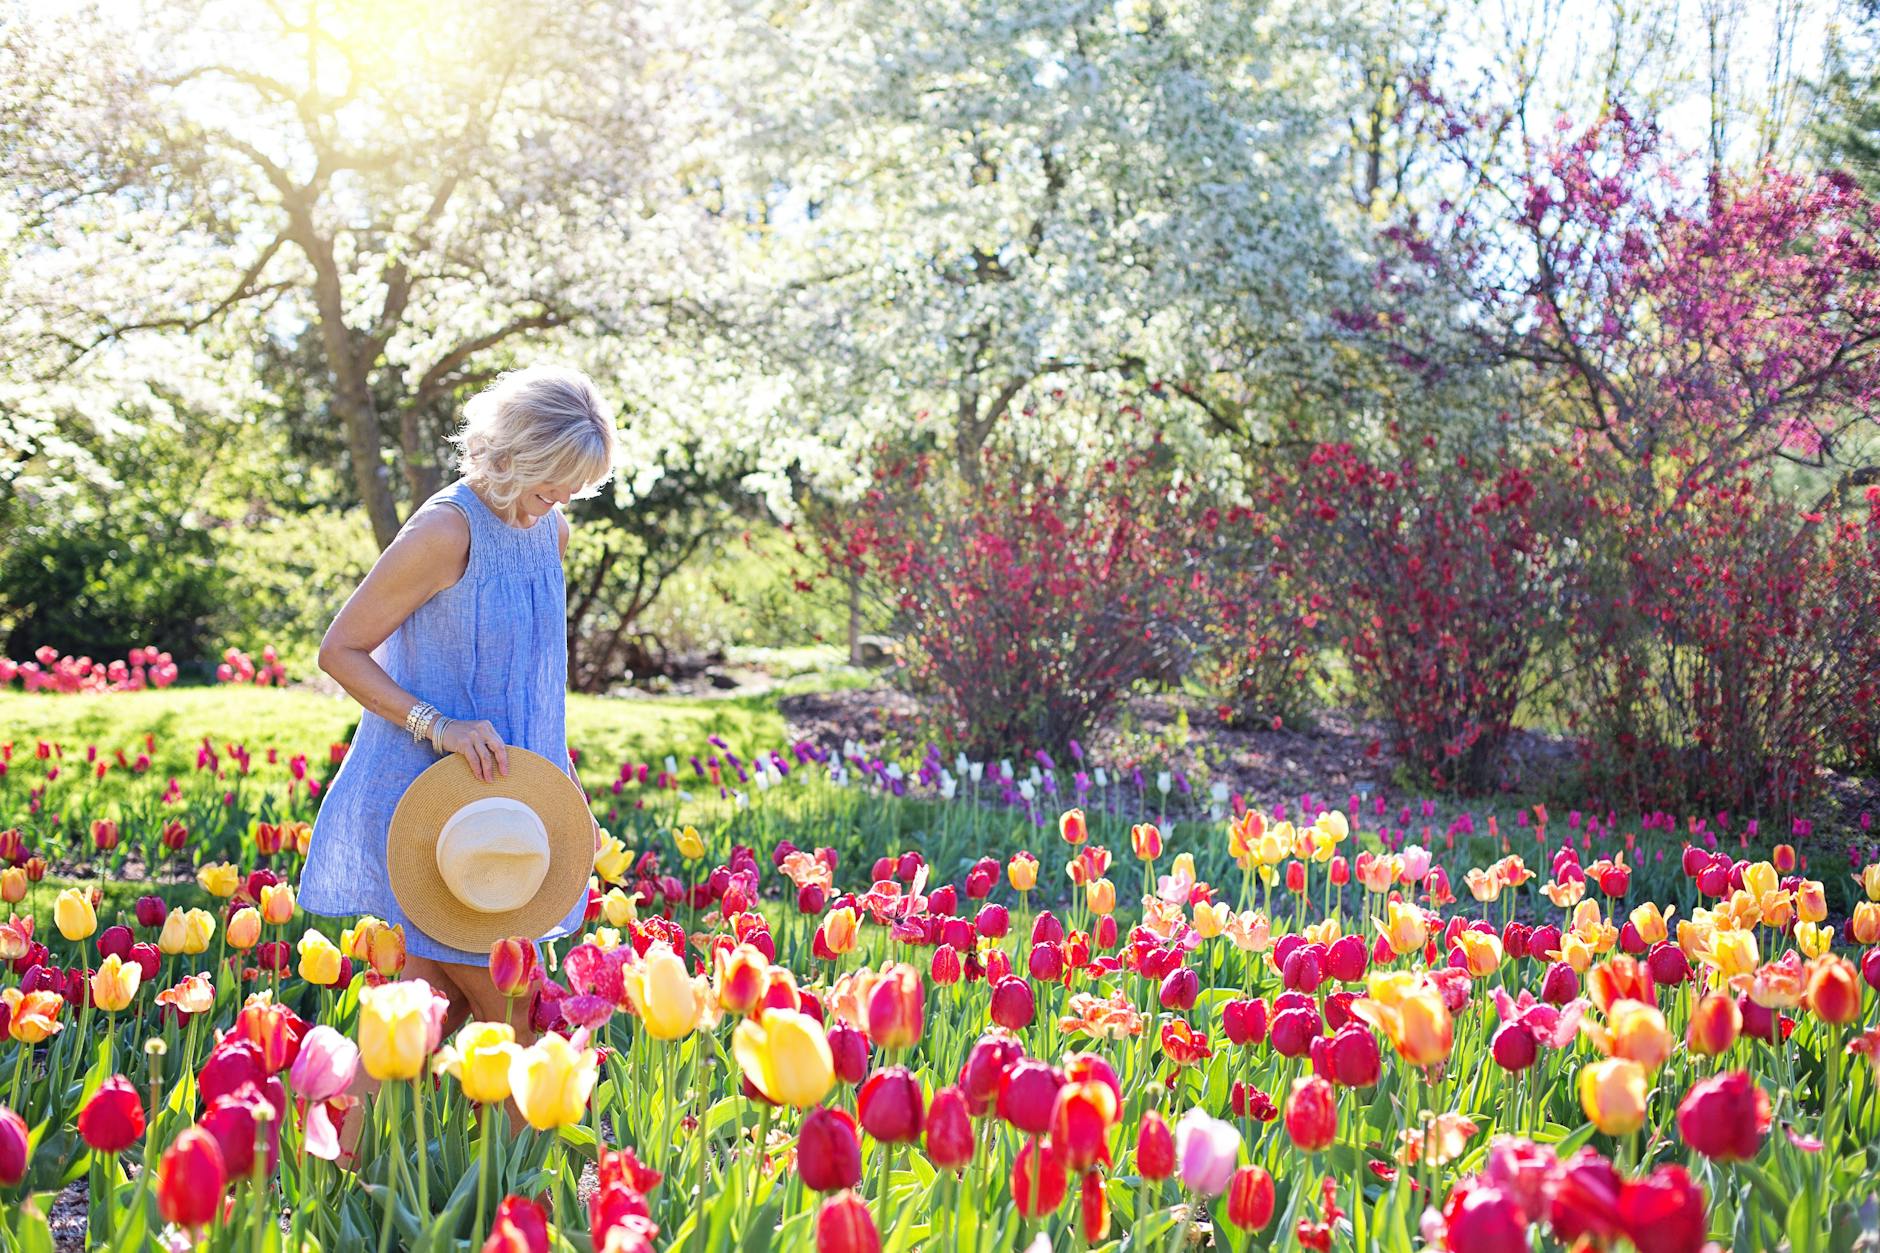 woman surrounded by colorful garden flowers